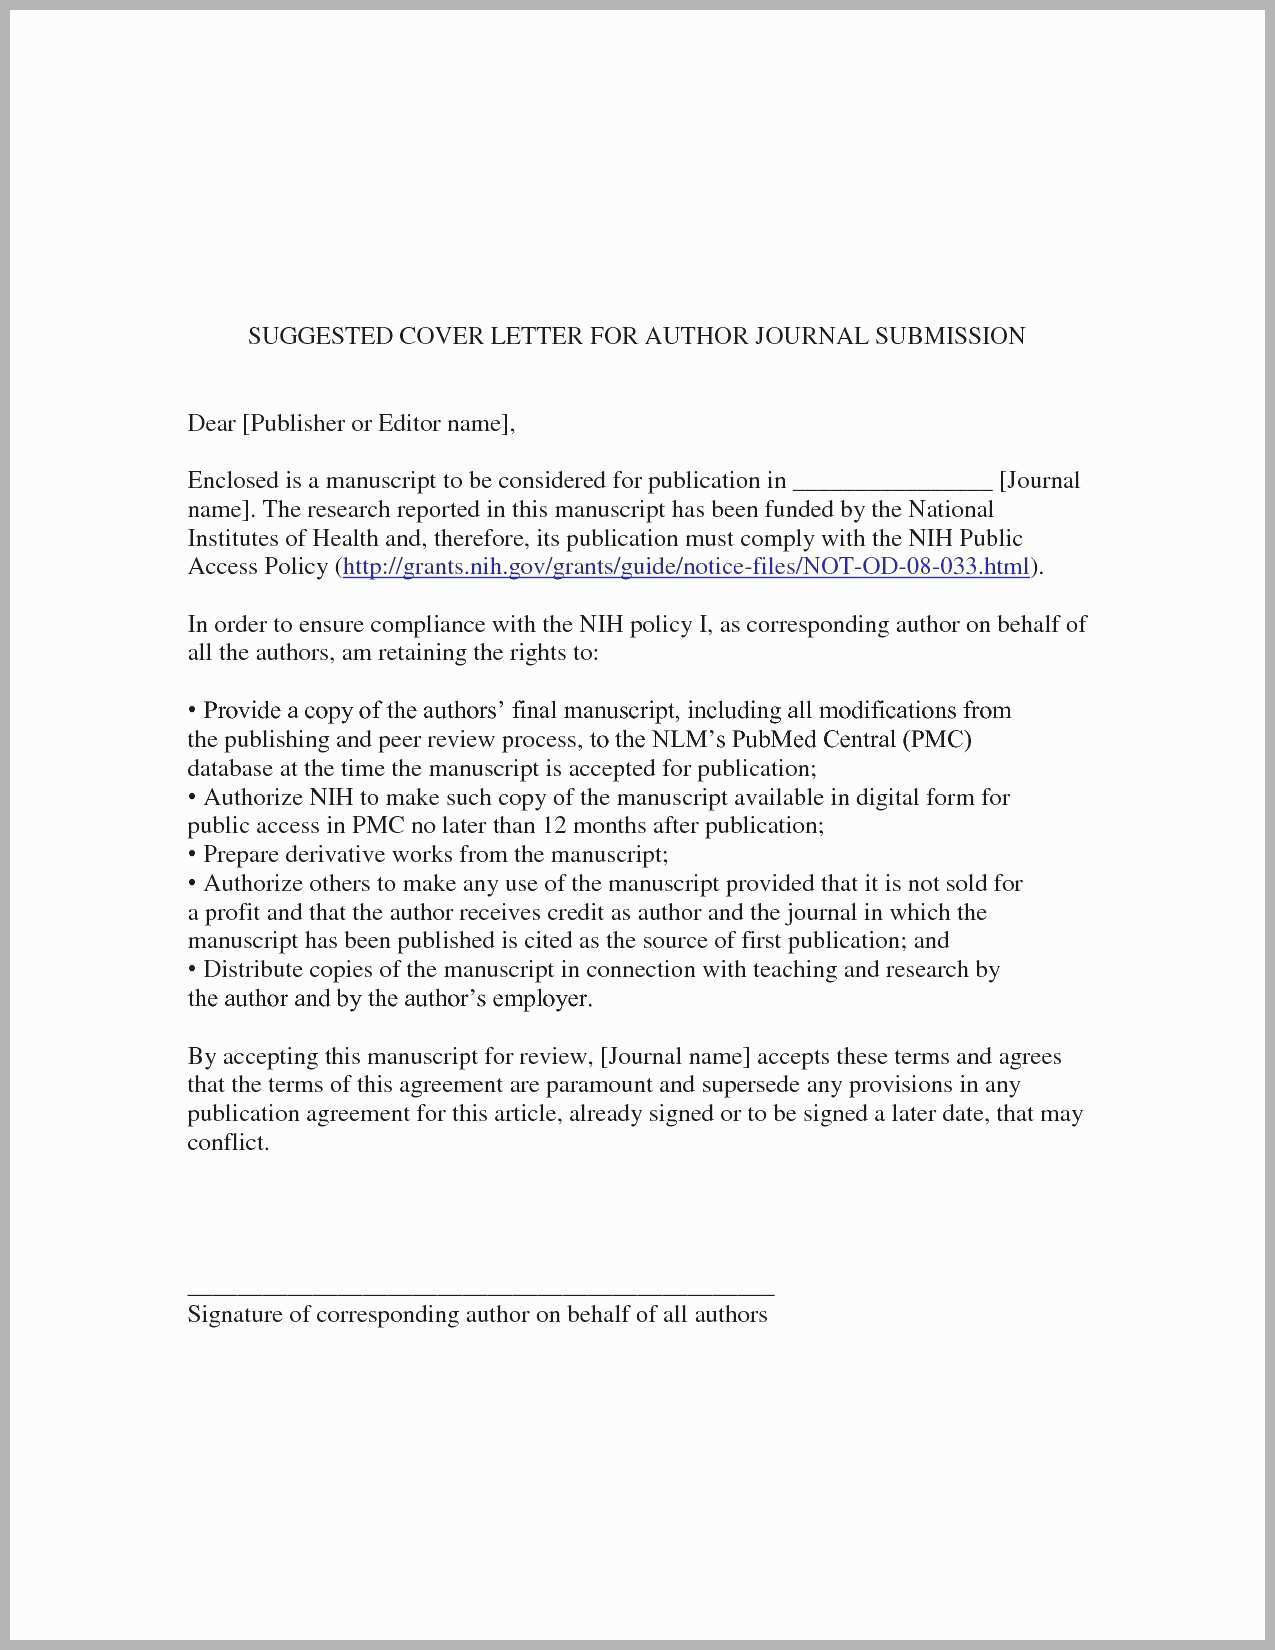 Eb1 Recommendation Letter Sample Debandje within proportions 1275 X 1650